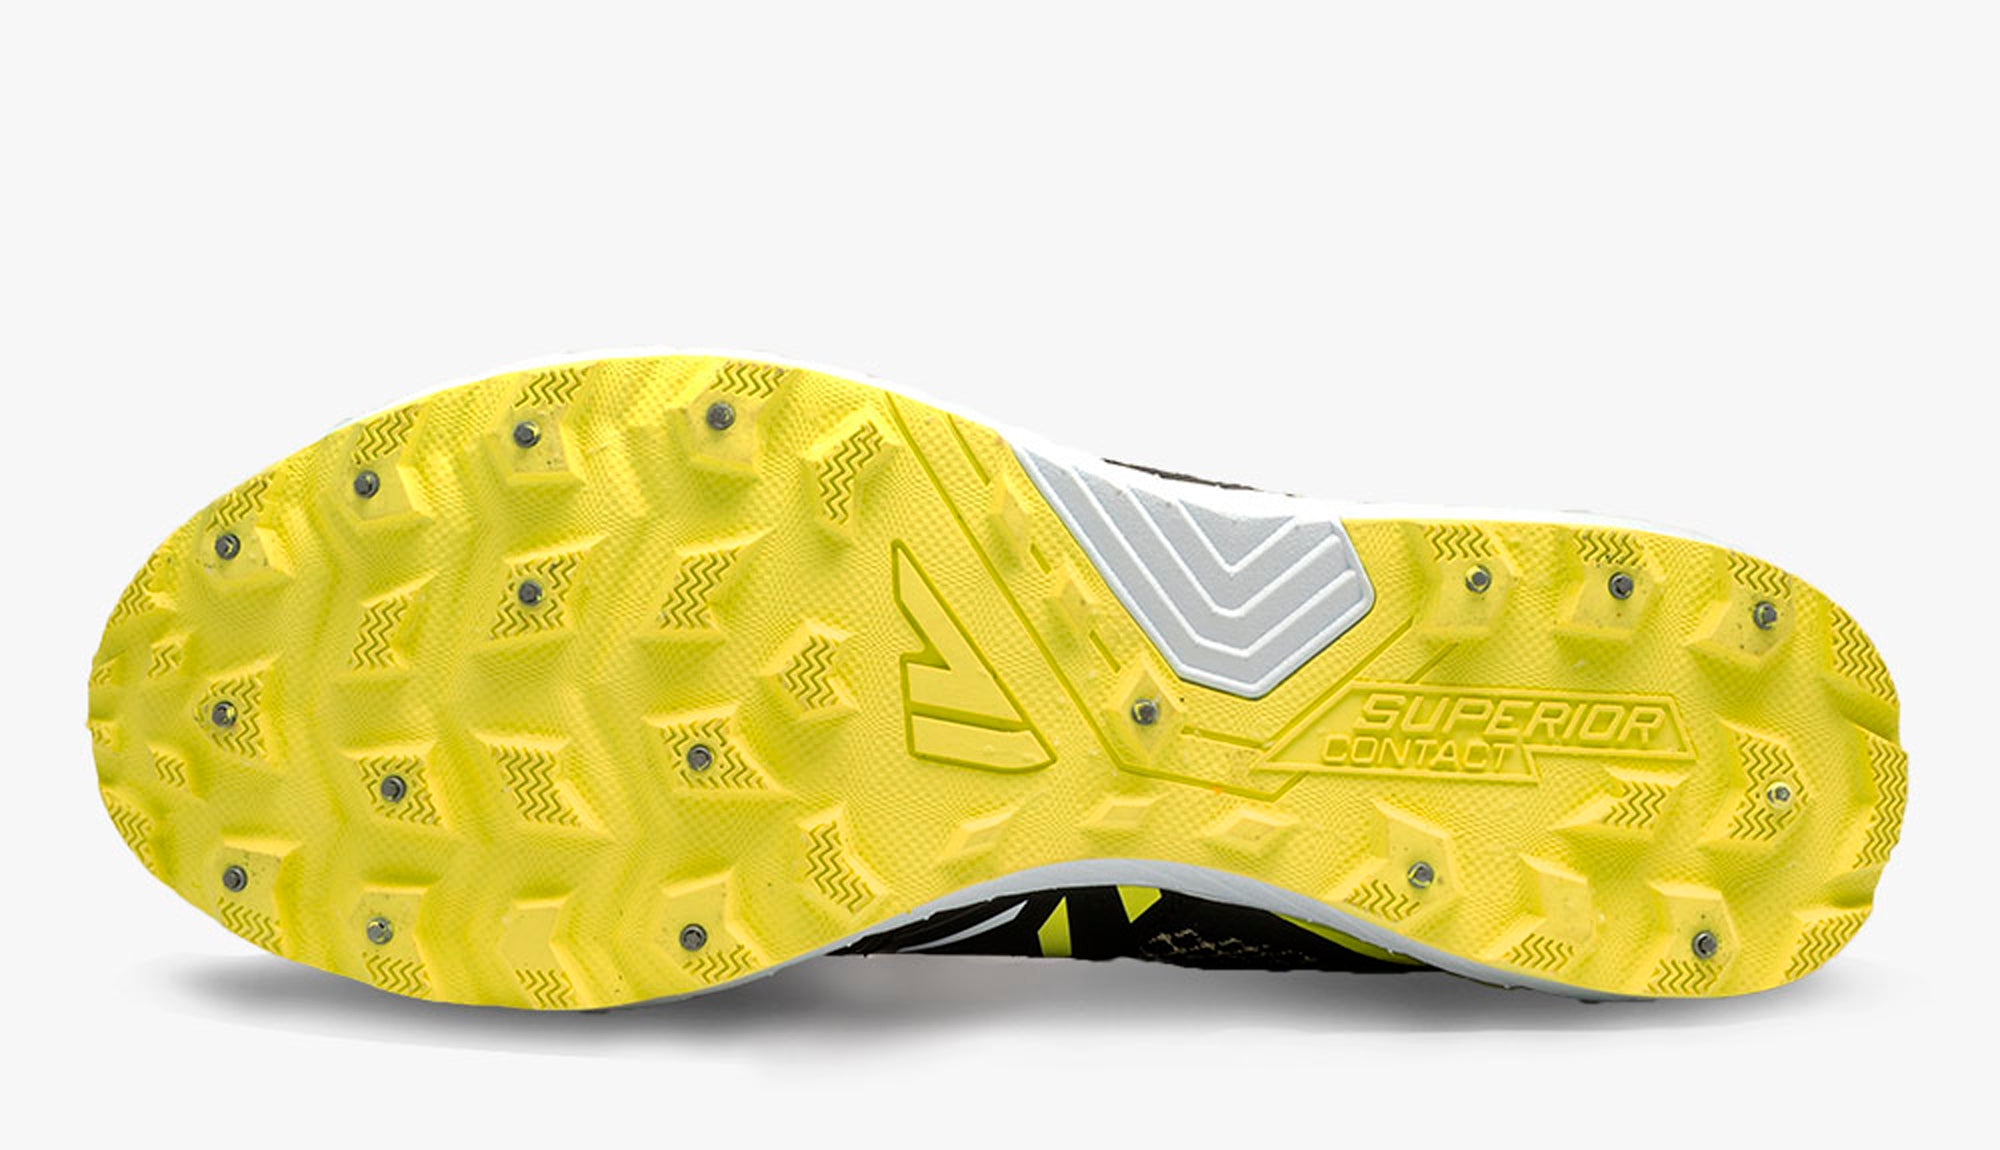 Men's Winter Running Shoes, VJ Shoes Ice Hero in yellow, grip with 18 carbon steel star-shaped studs